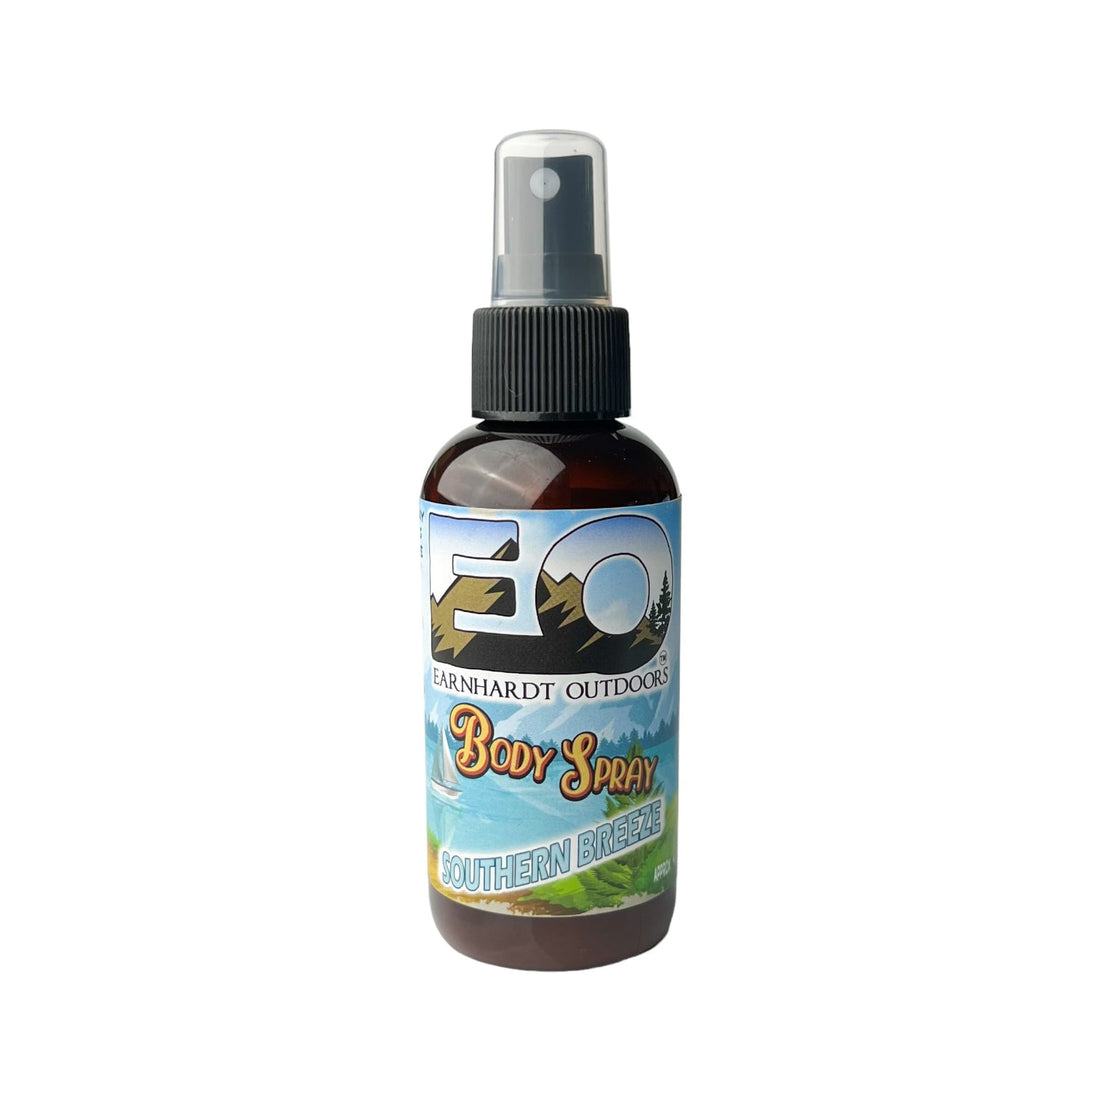 Southern Breeze Earnhardt Outdoors Body Spray - Old Town Soap Co.